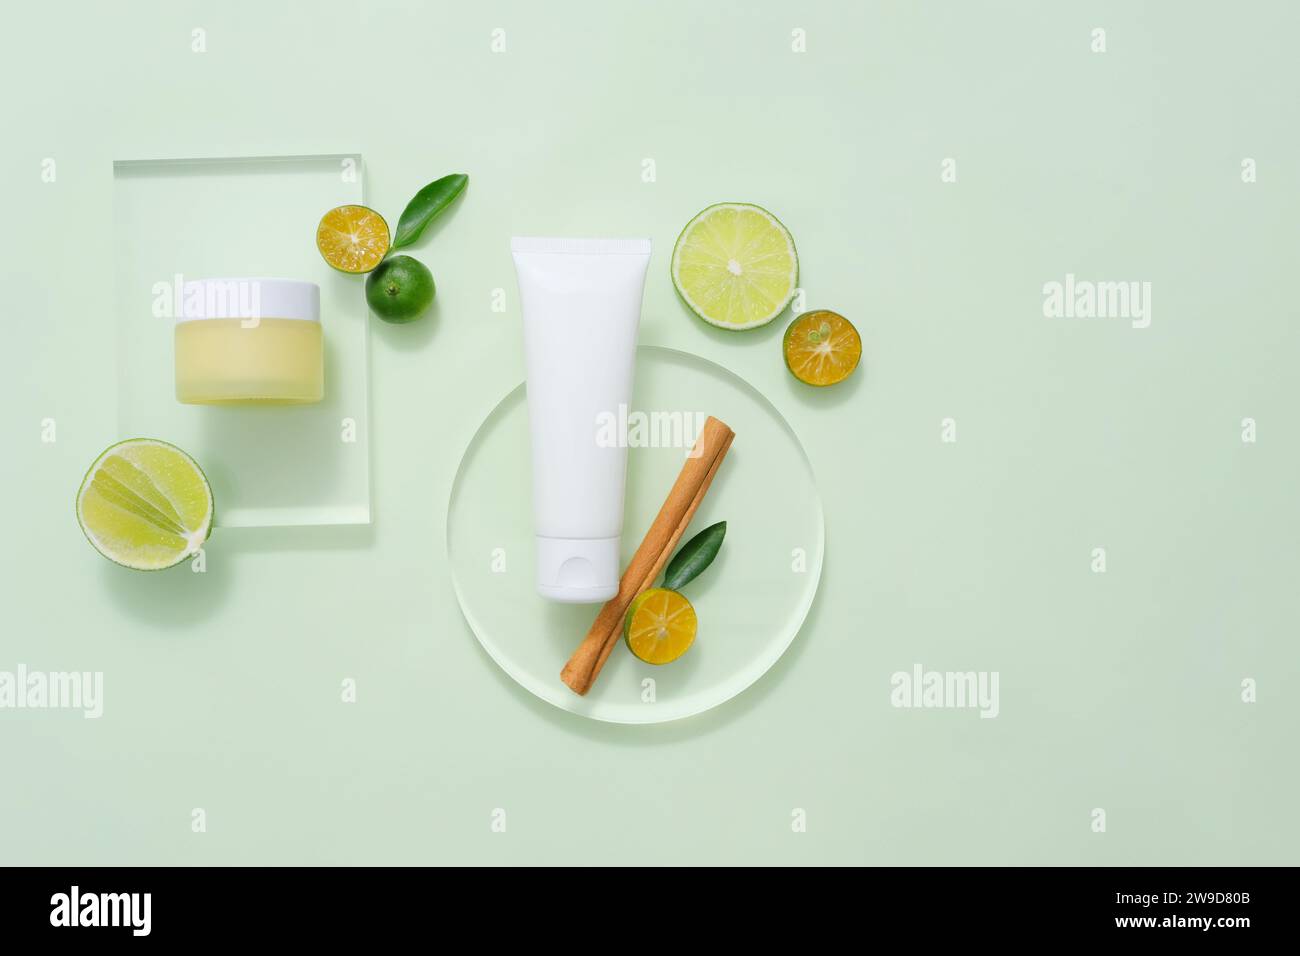 On the pastel background, set of cosmetic bottles displayed with slices of lime and kumquat, cinnamon stick decorated. Mock up for package design. Nat Stock Photo